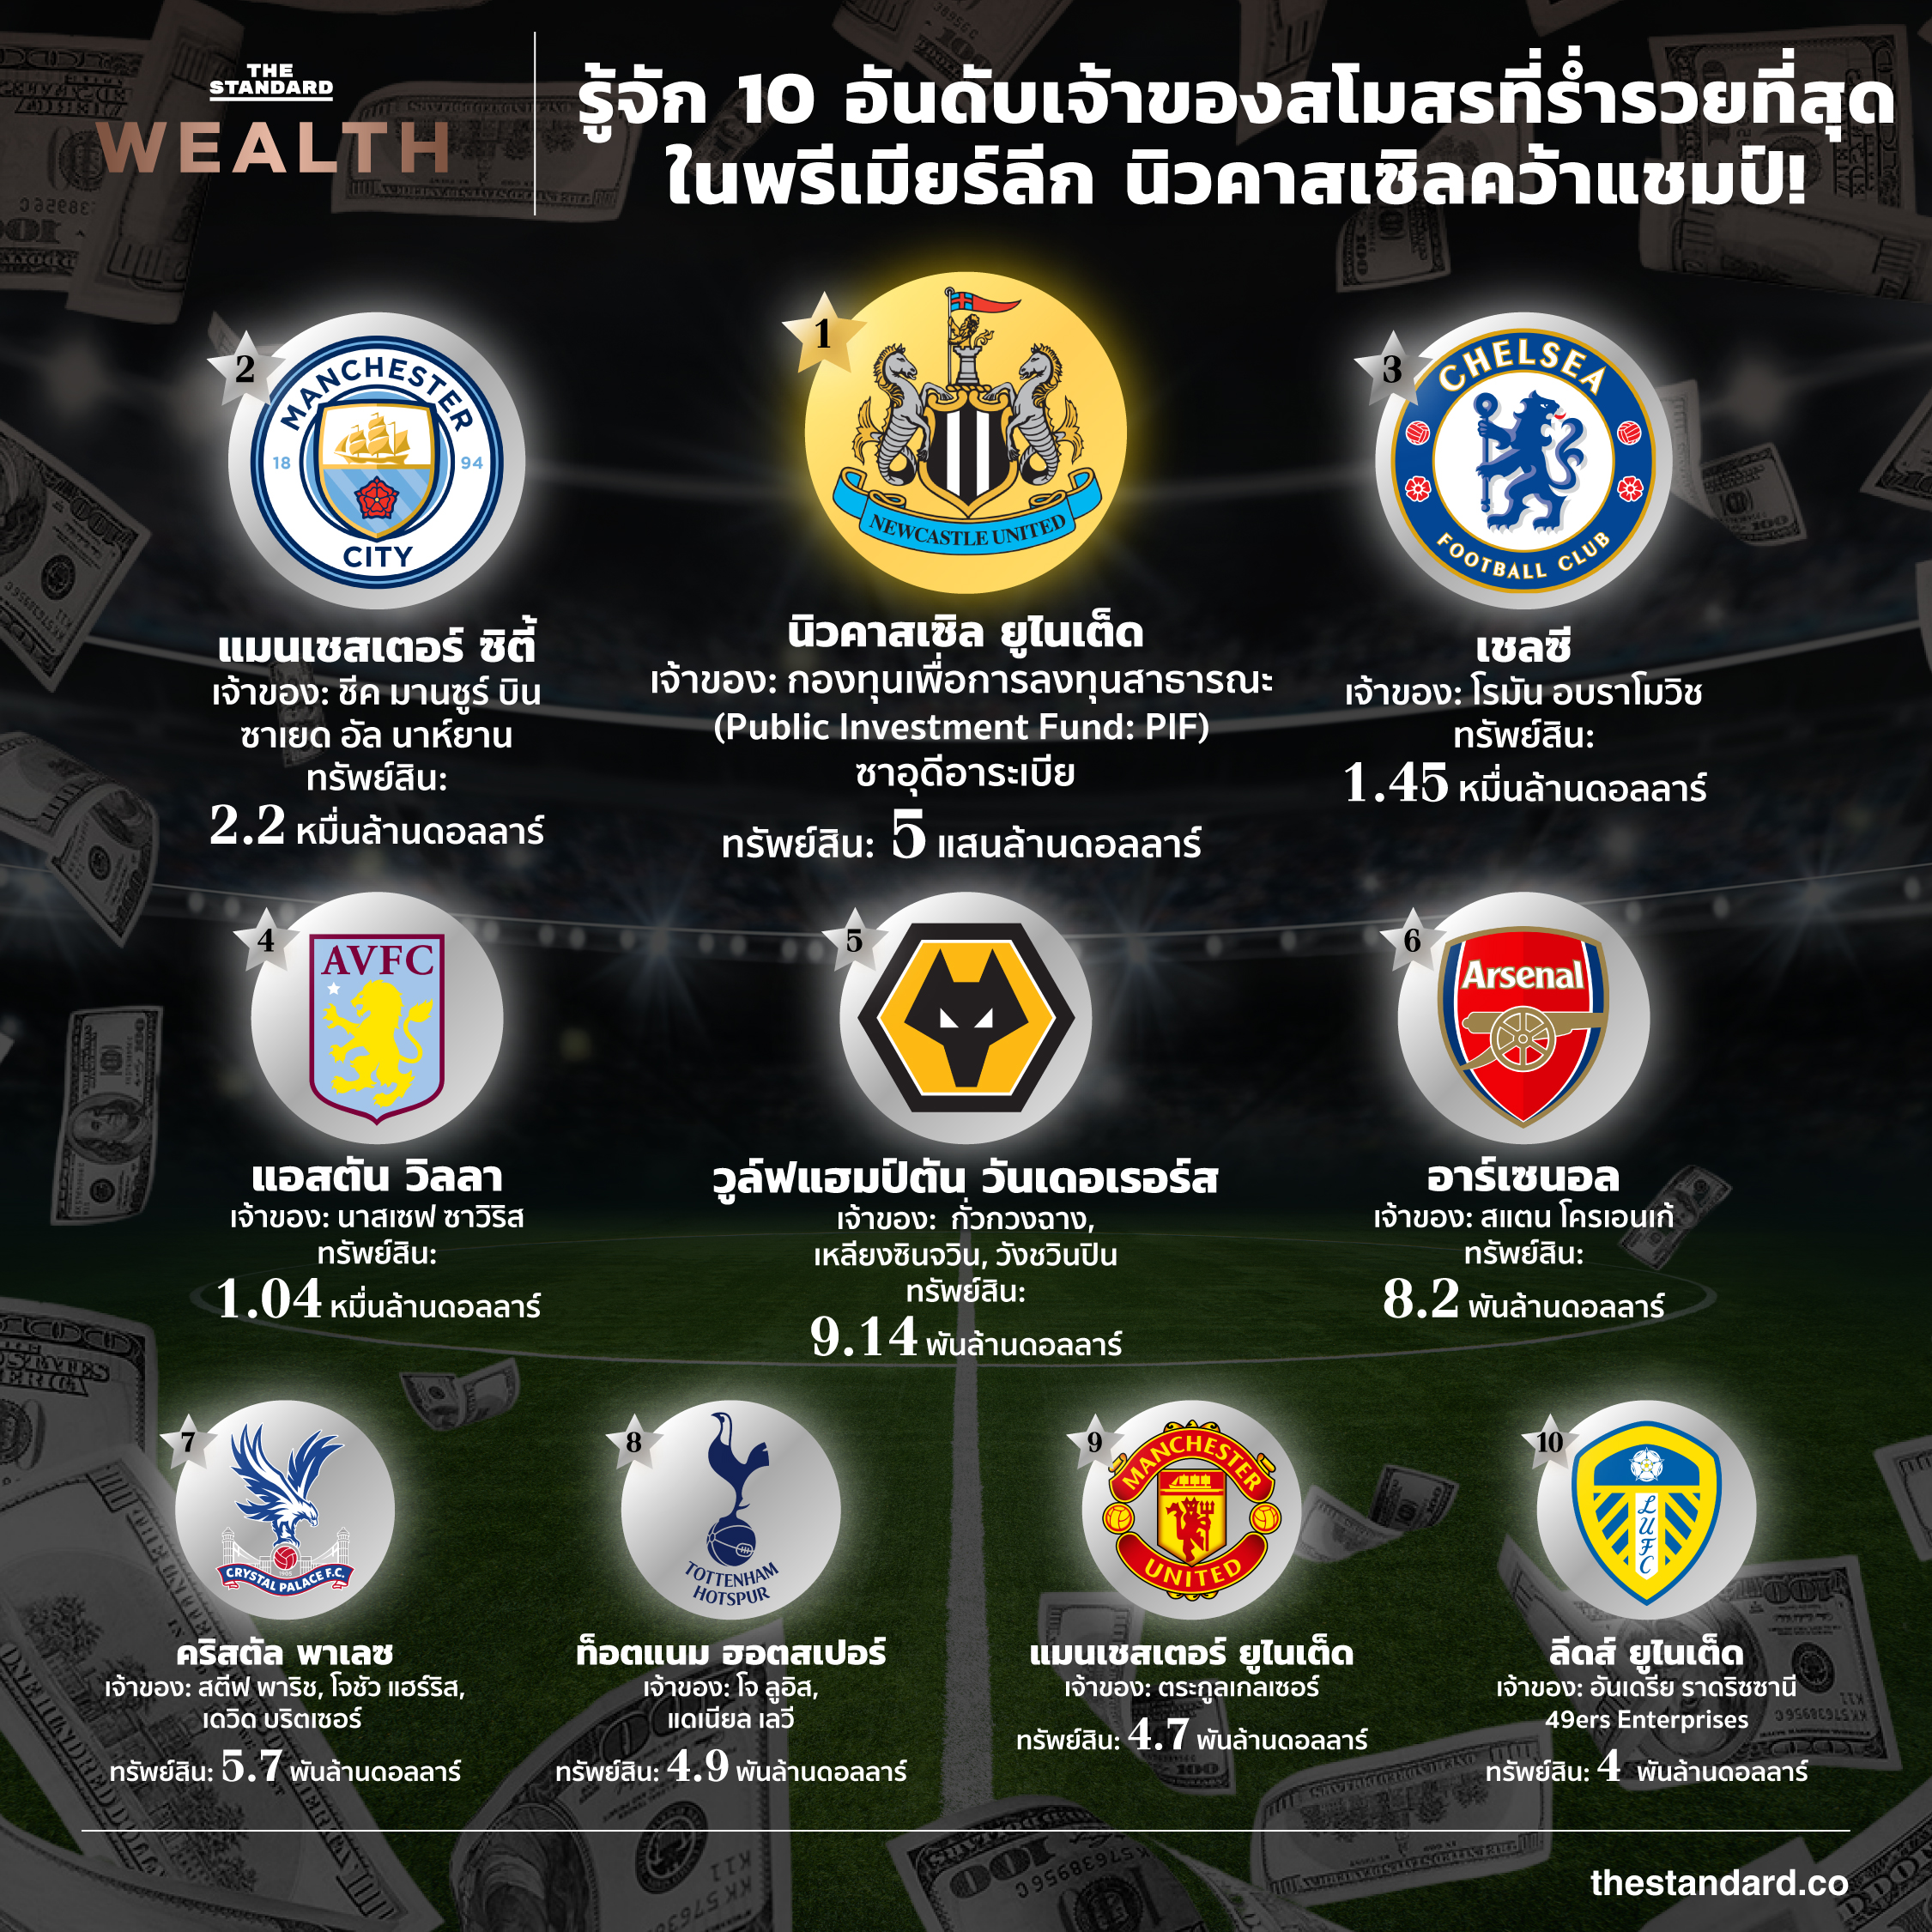 richest club owners